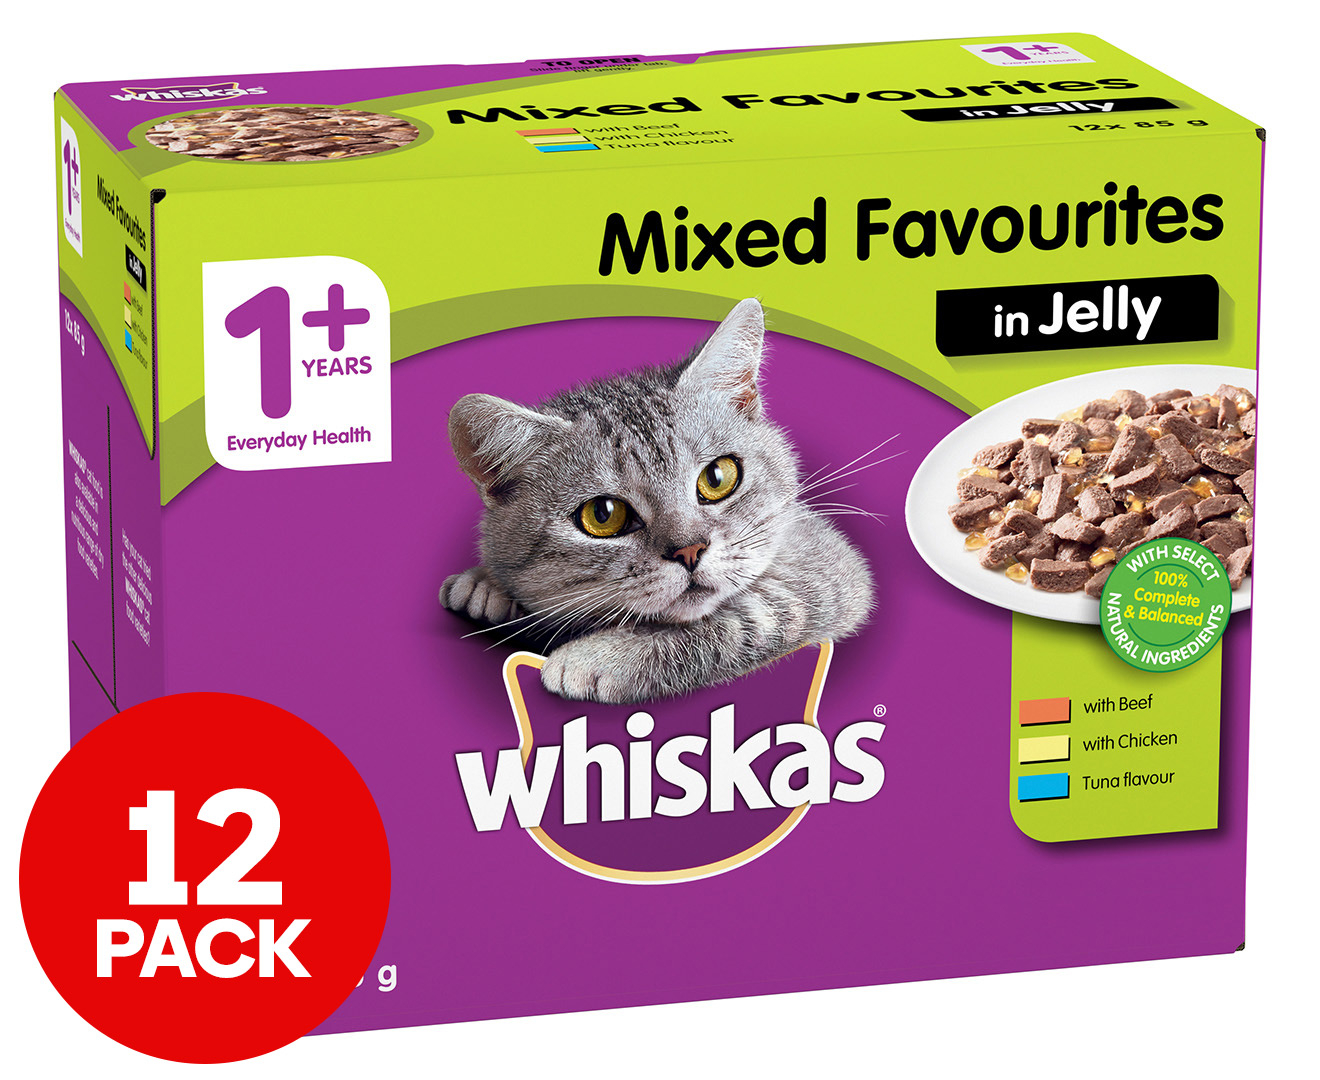 Jelly 12 x Whiskas In Favourites Cat 85g Mixed Wet Adult Food